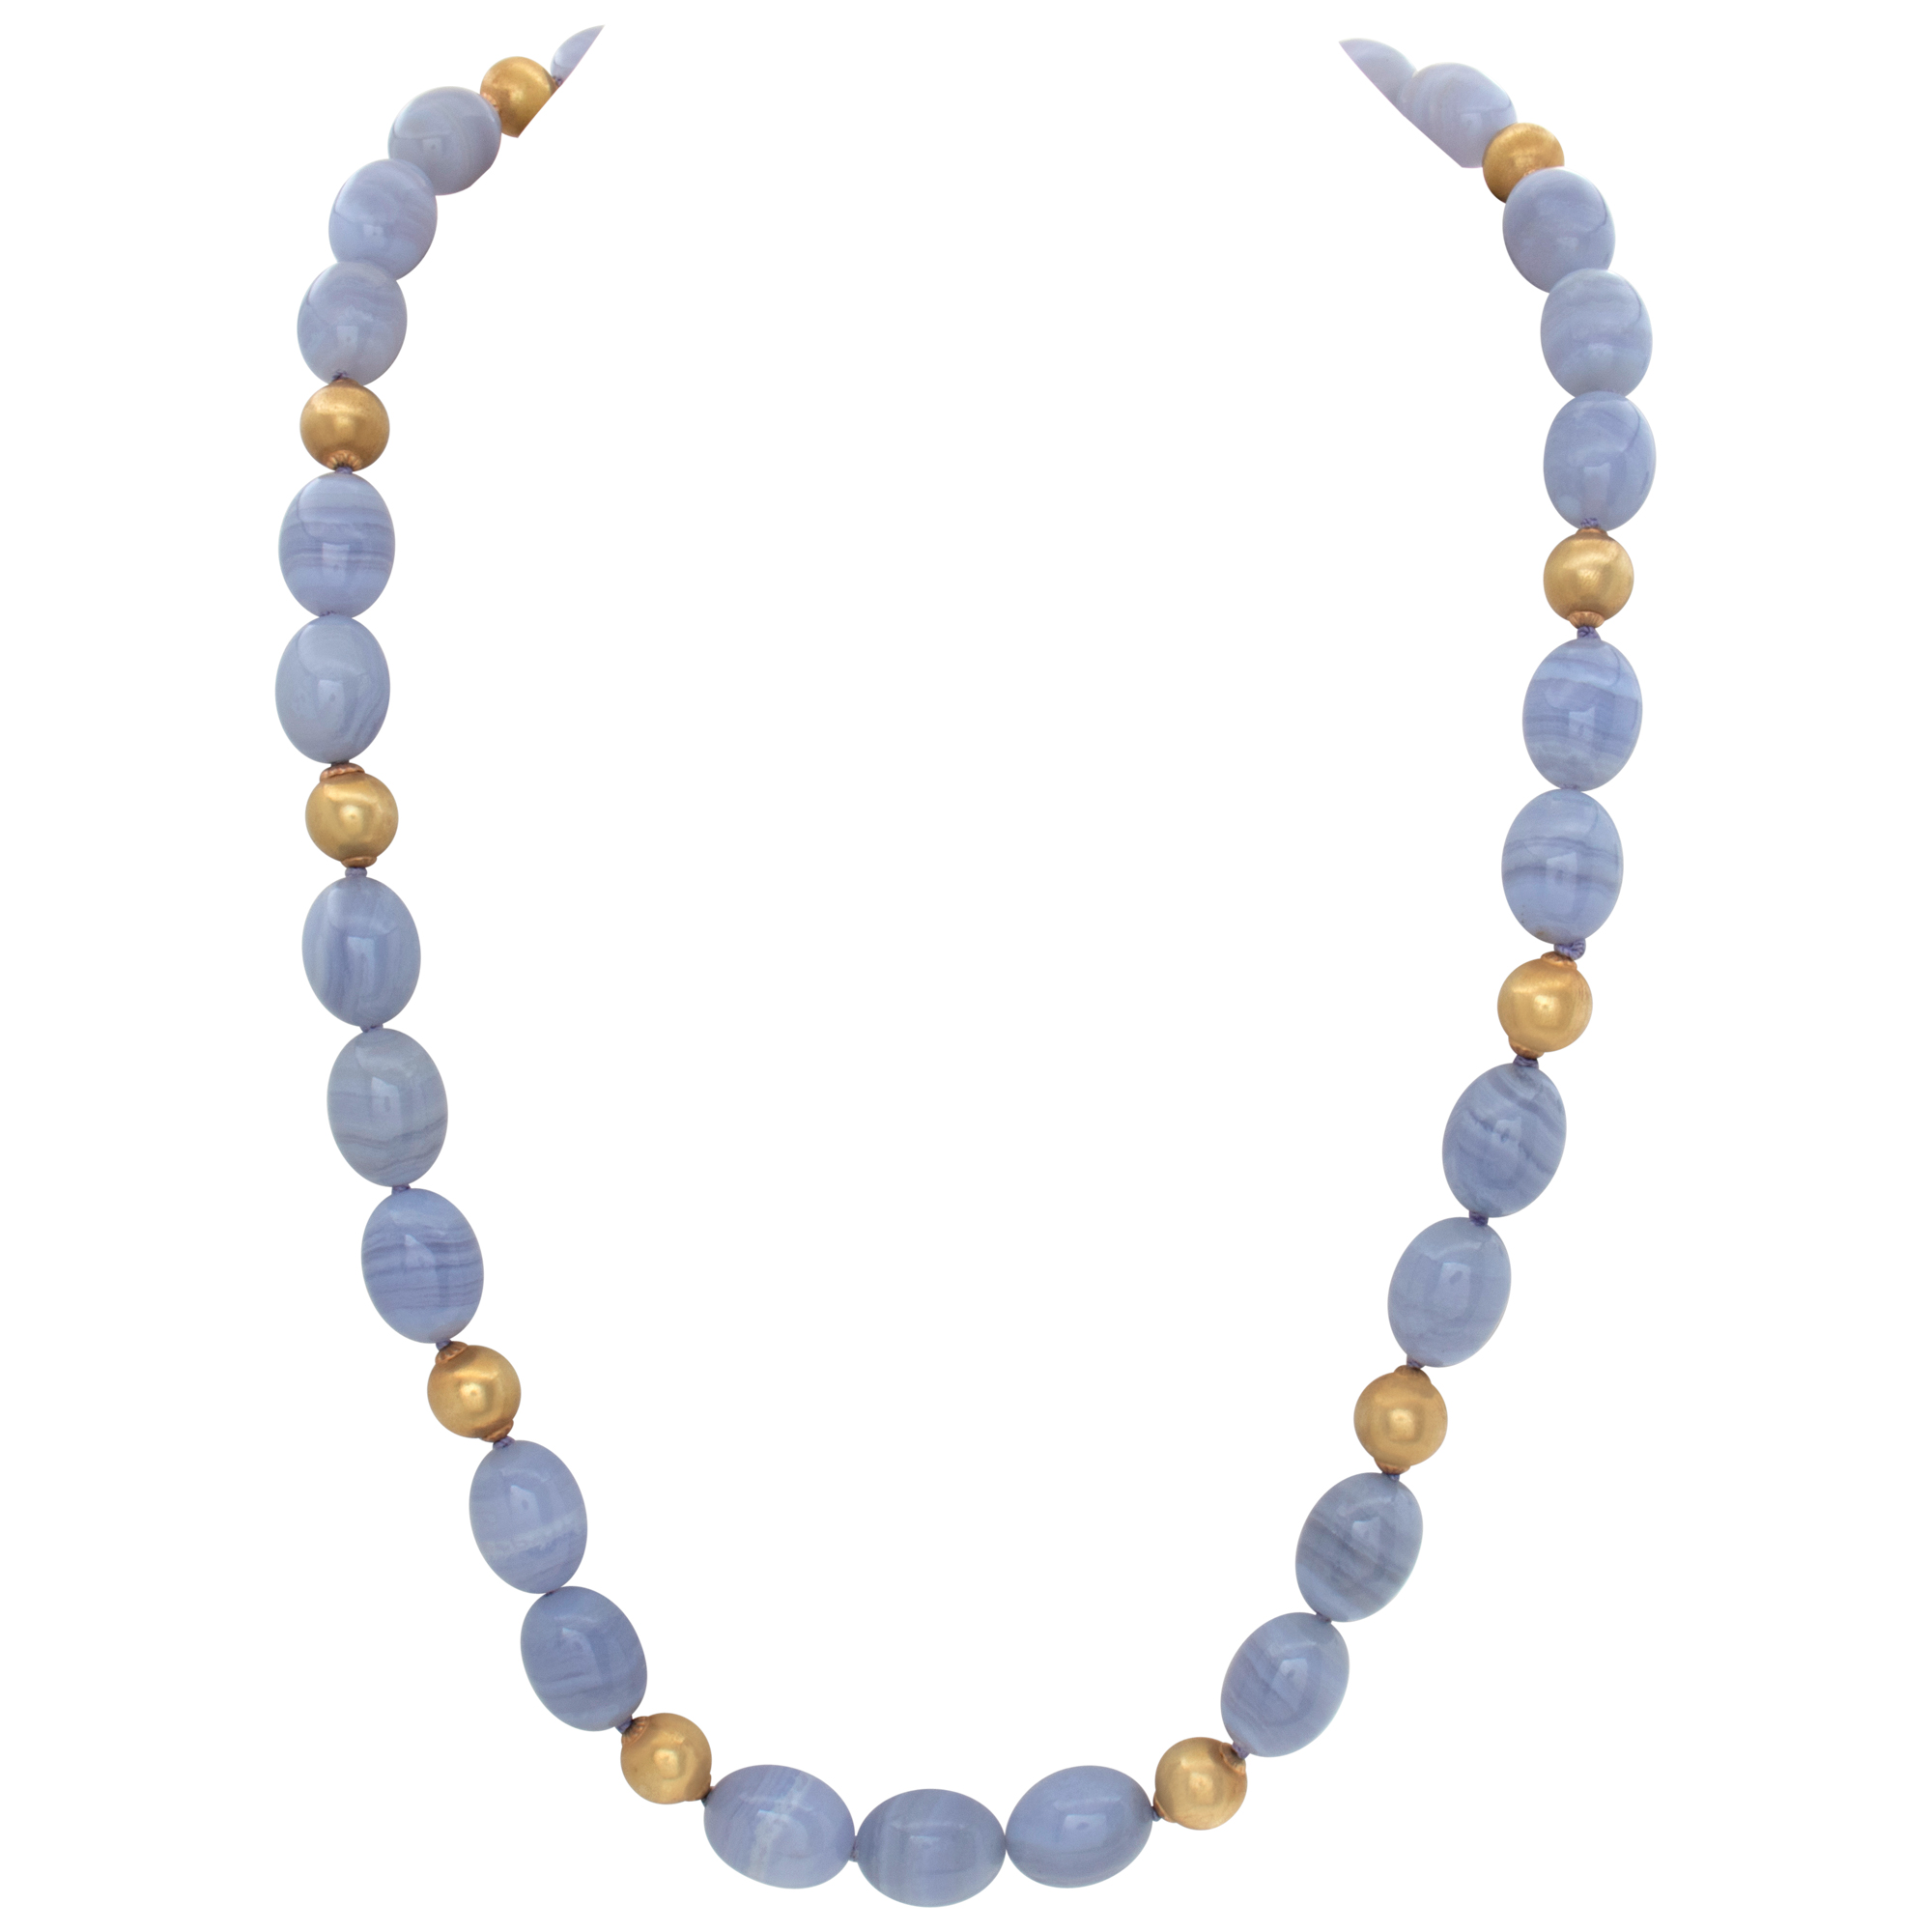 Blue lace chalcedony necklace with 18k gold beads